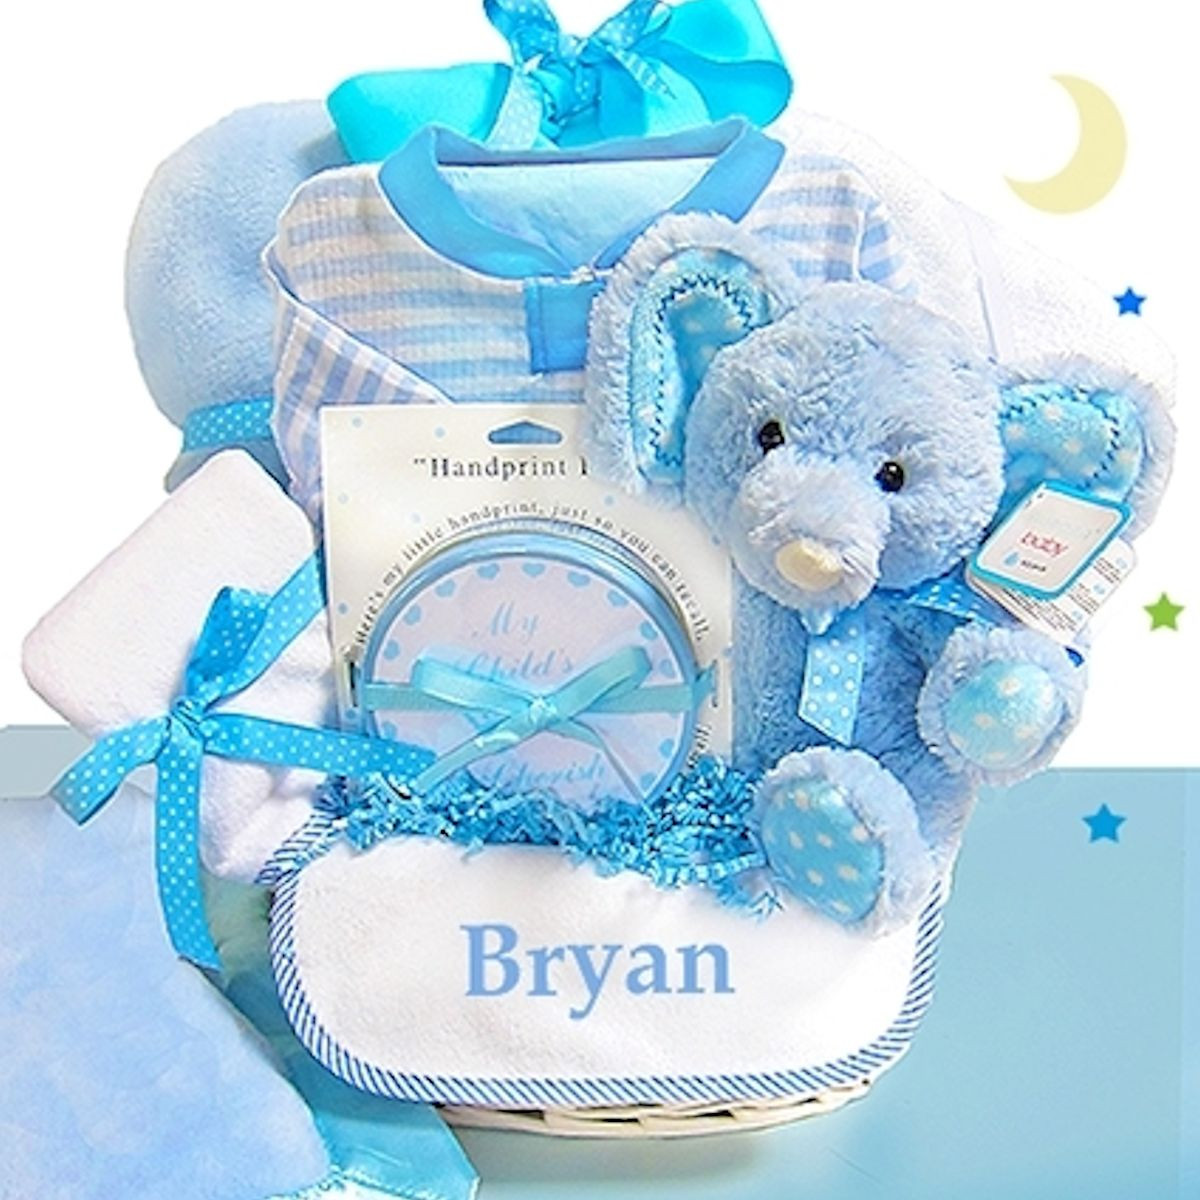 Personalized Baby Gifts For Boys
 Baby Boy Gift Basket Blue Elephant